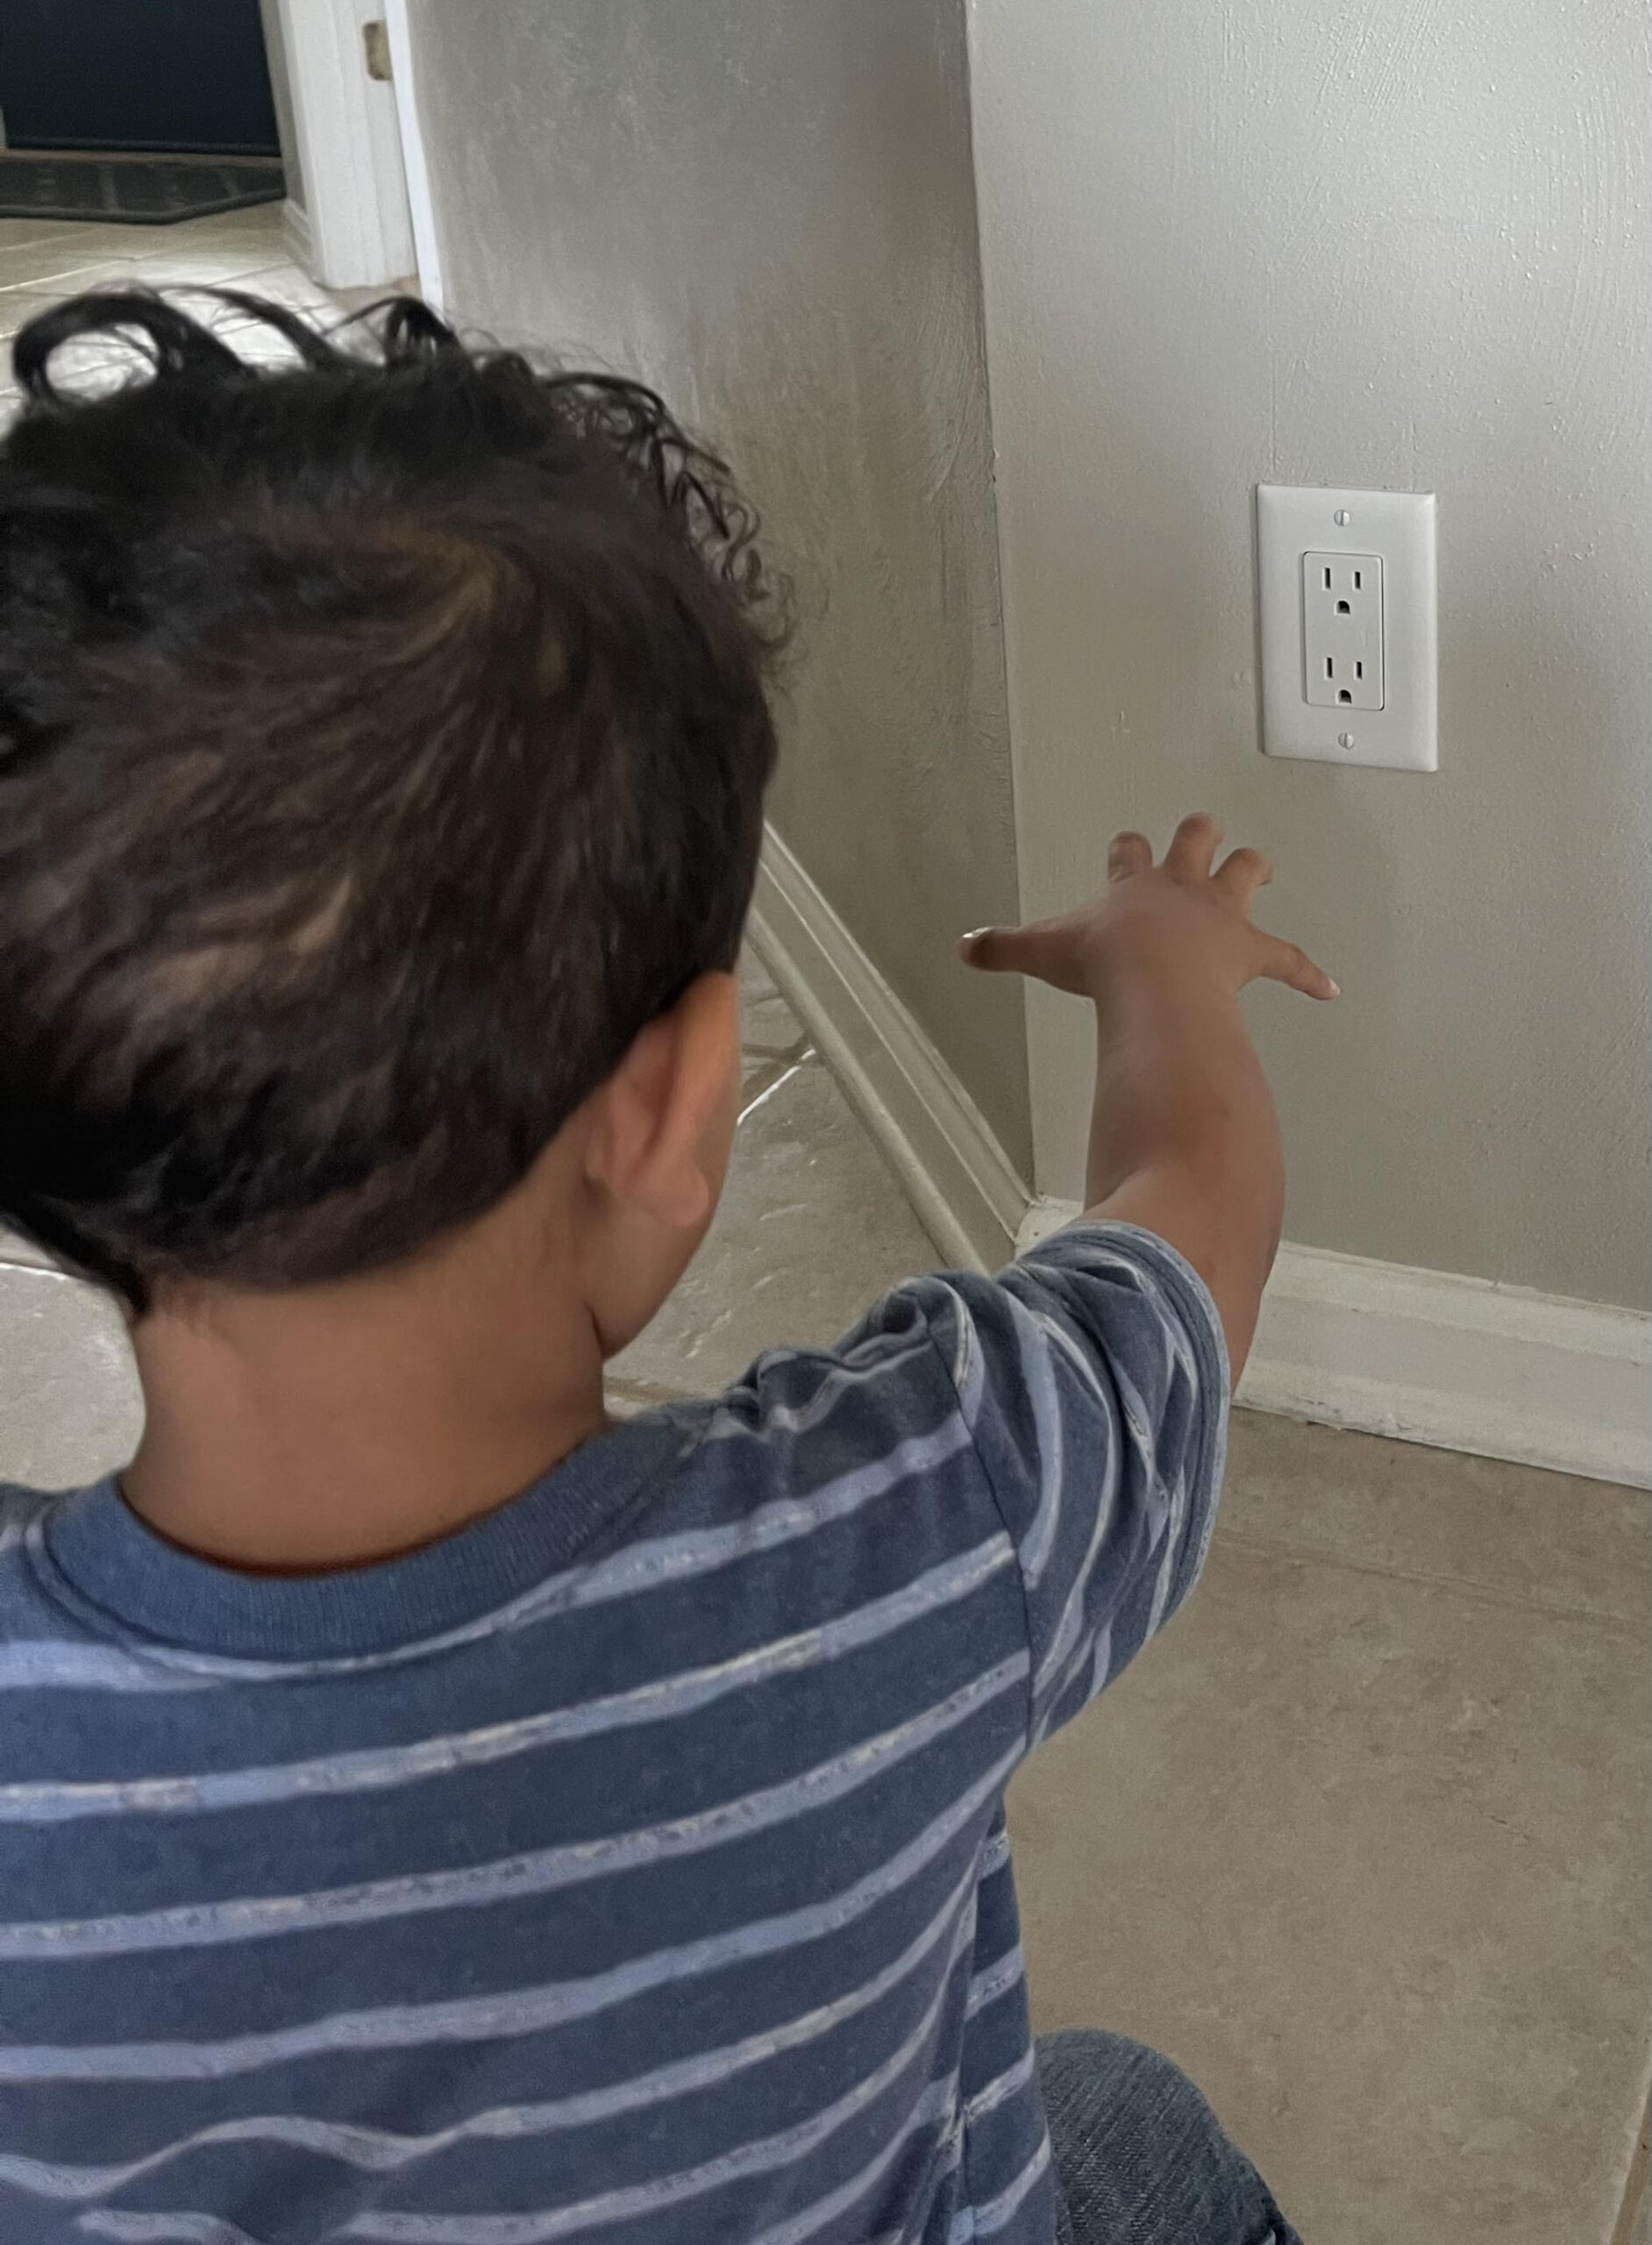 The Benefits of Tamper-Resistant Outlets